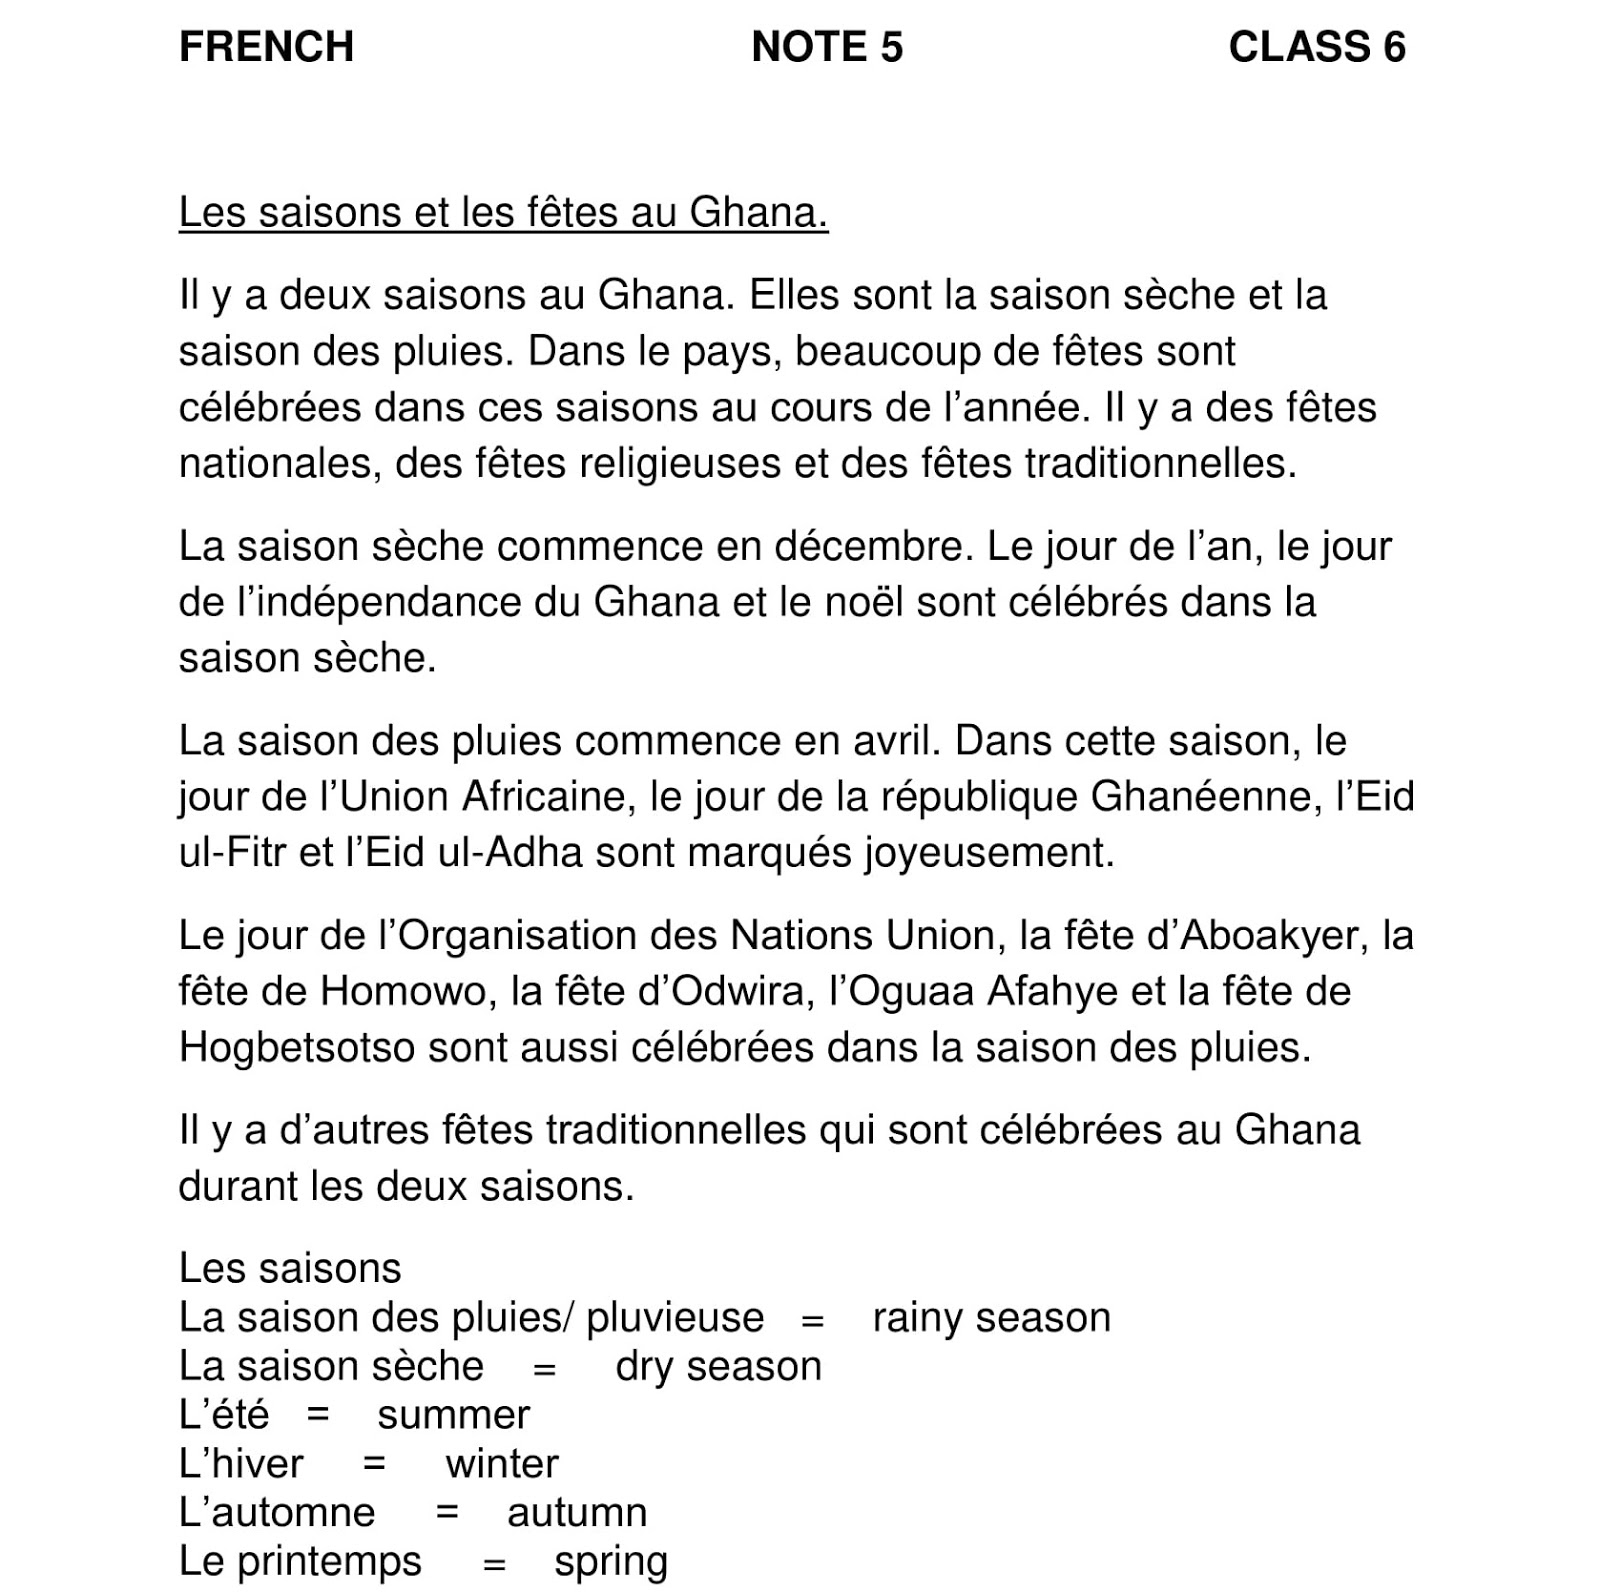 mon pays in french essay pdf